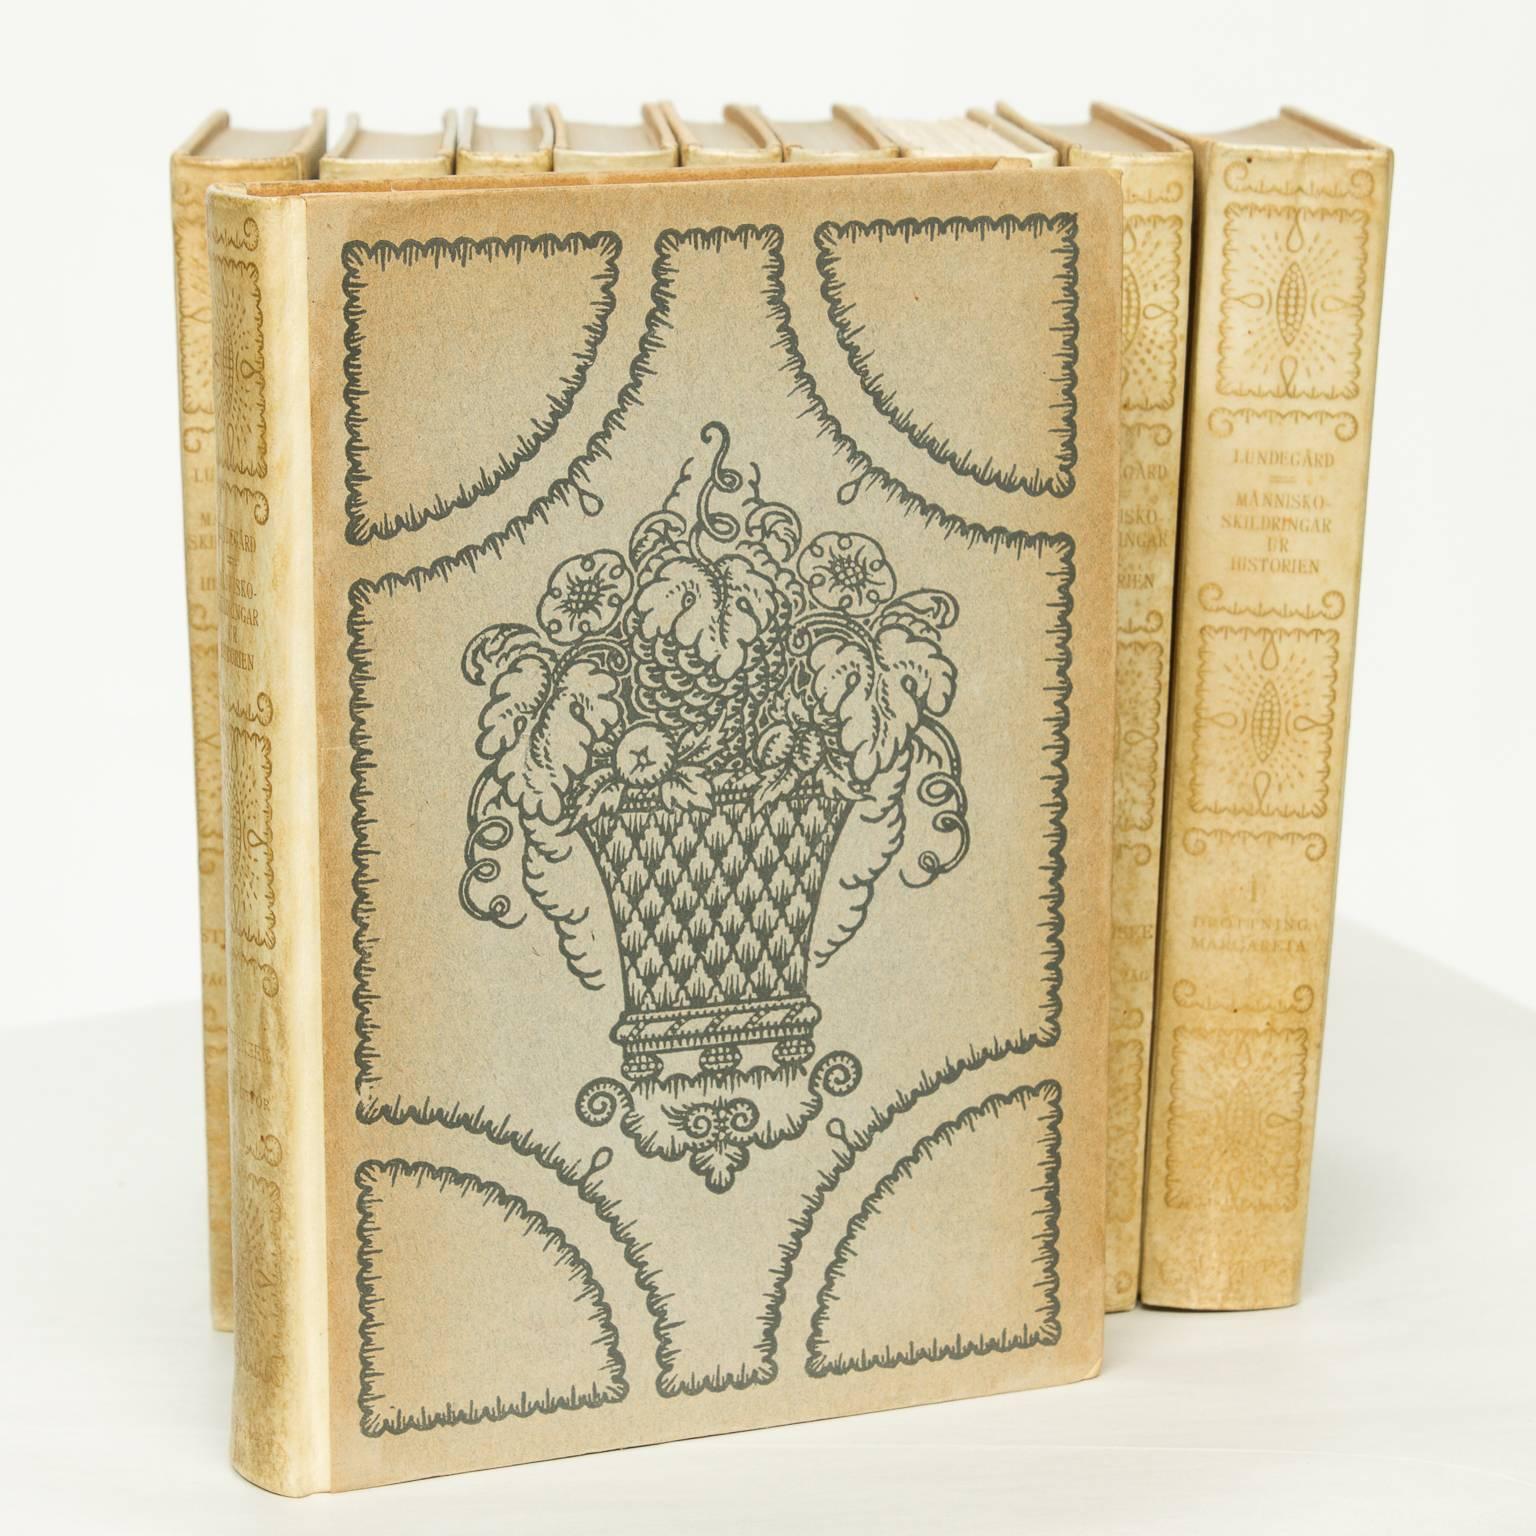 Set of ten Swedish leather bound books in a tan to light green finished leather. Very nice embossed paper sides having a fruit basket design.